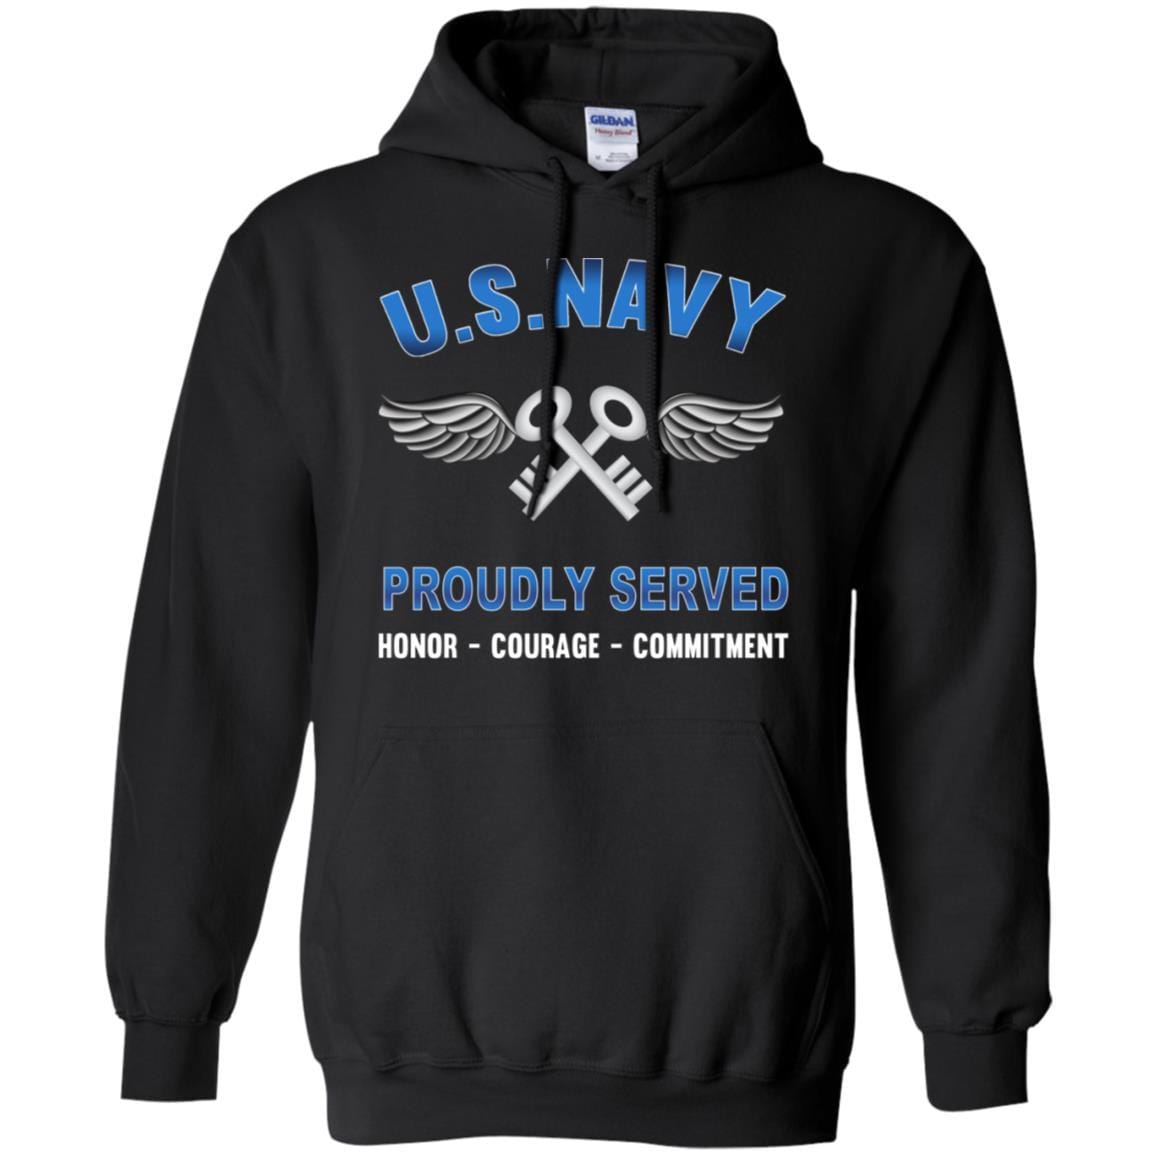 Navy Aviation Storekeeper Navy AK - Proudly Served T-Shirt For Men On Front-TShirt-Navy-Veterans Nation